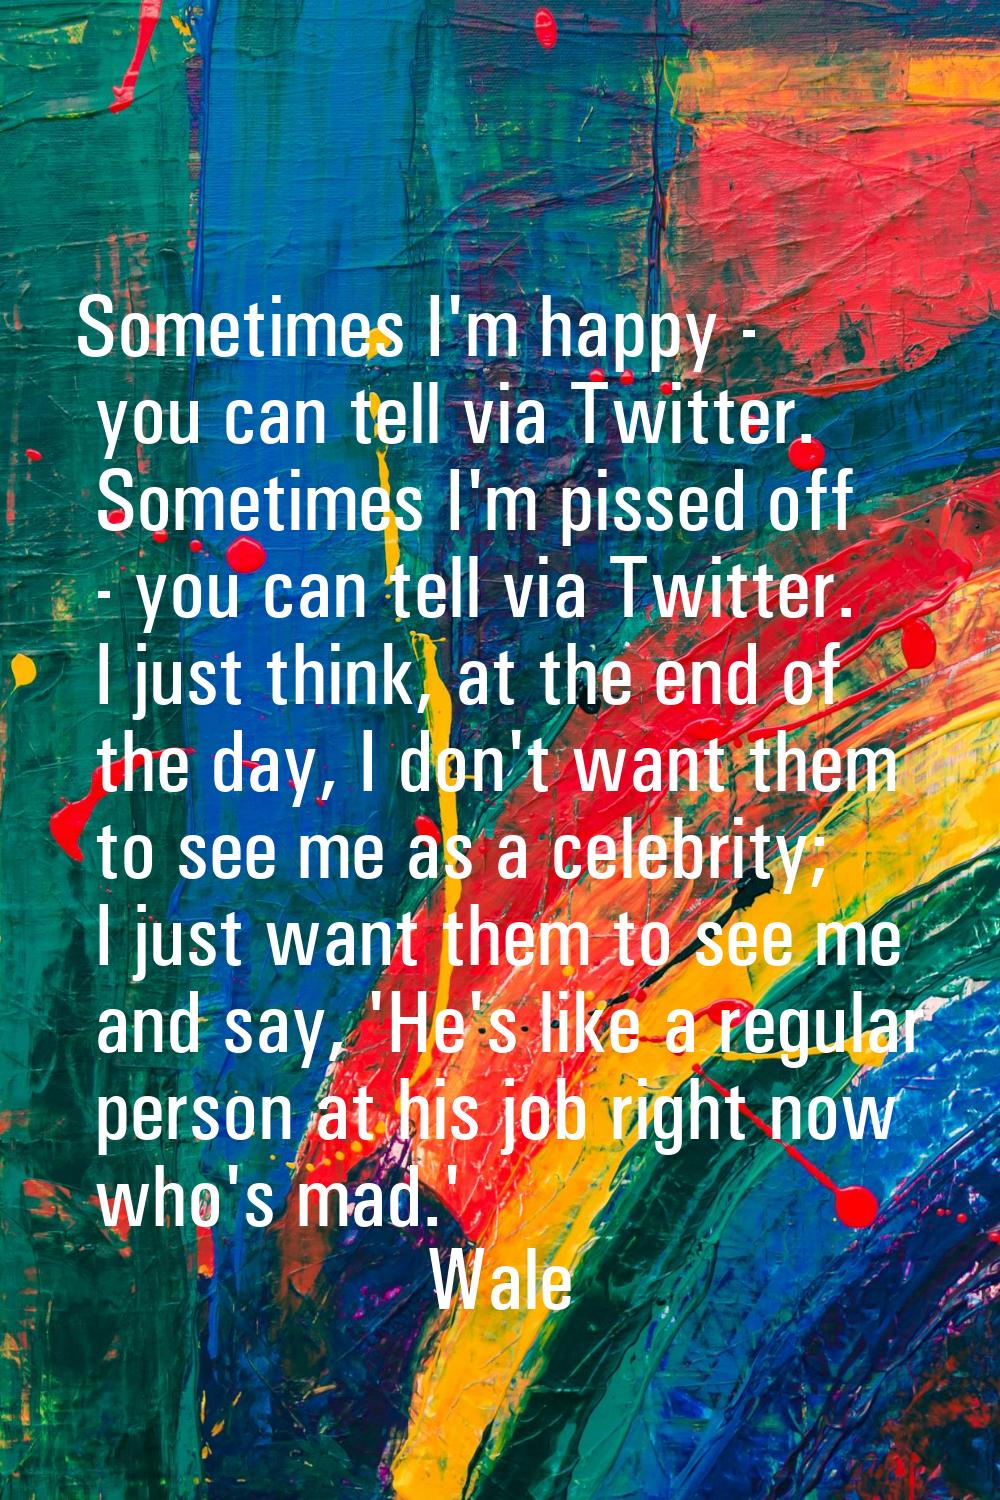 Sometimes I'm happy - you can tell via Twitter. Sometimes I'm pissed off - you can tell via Twitter